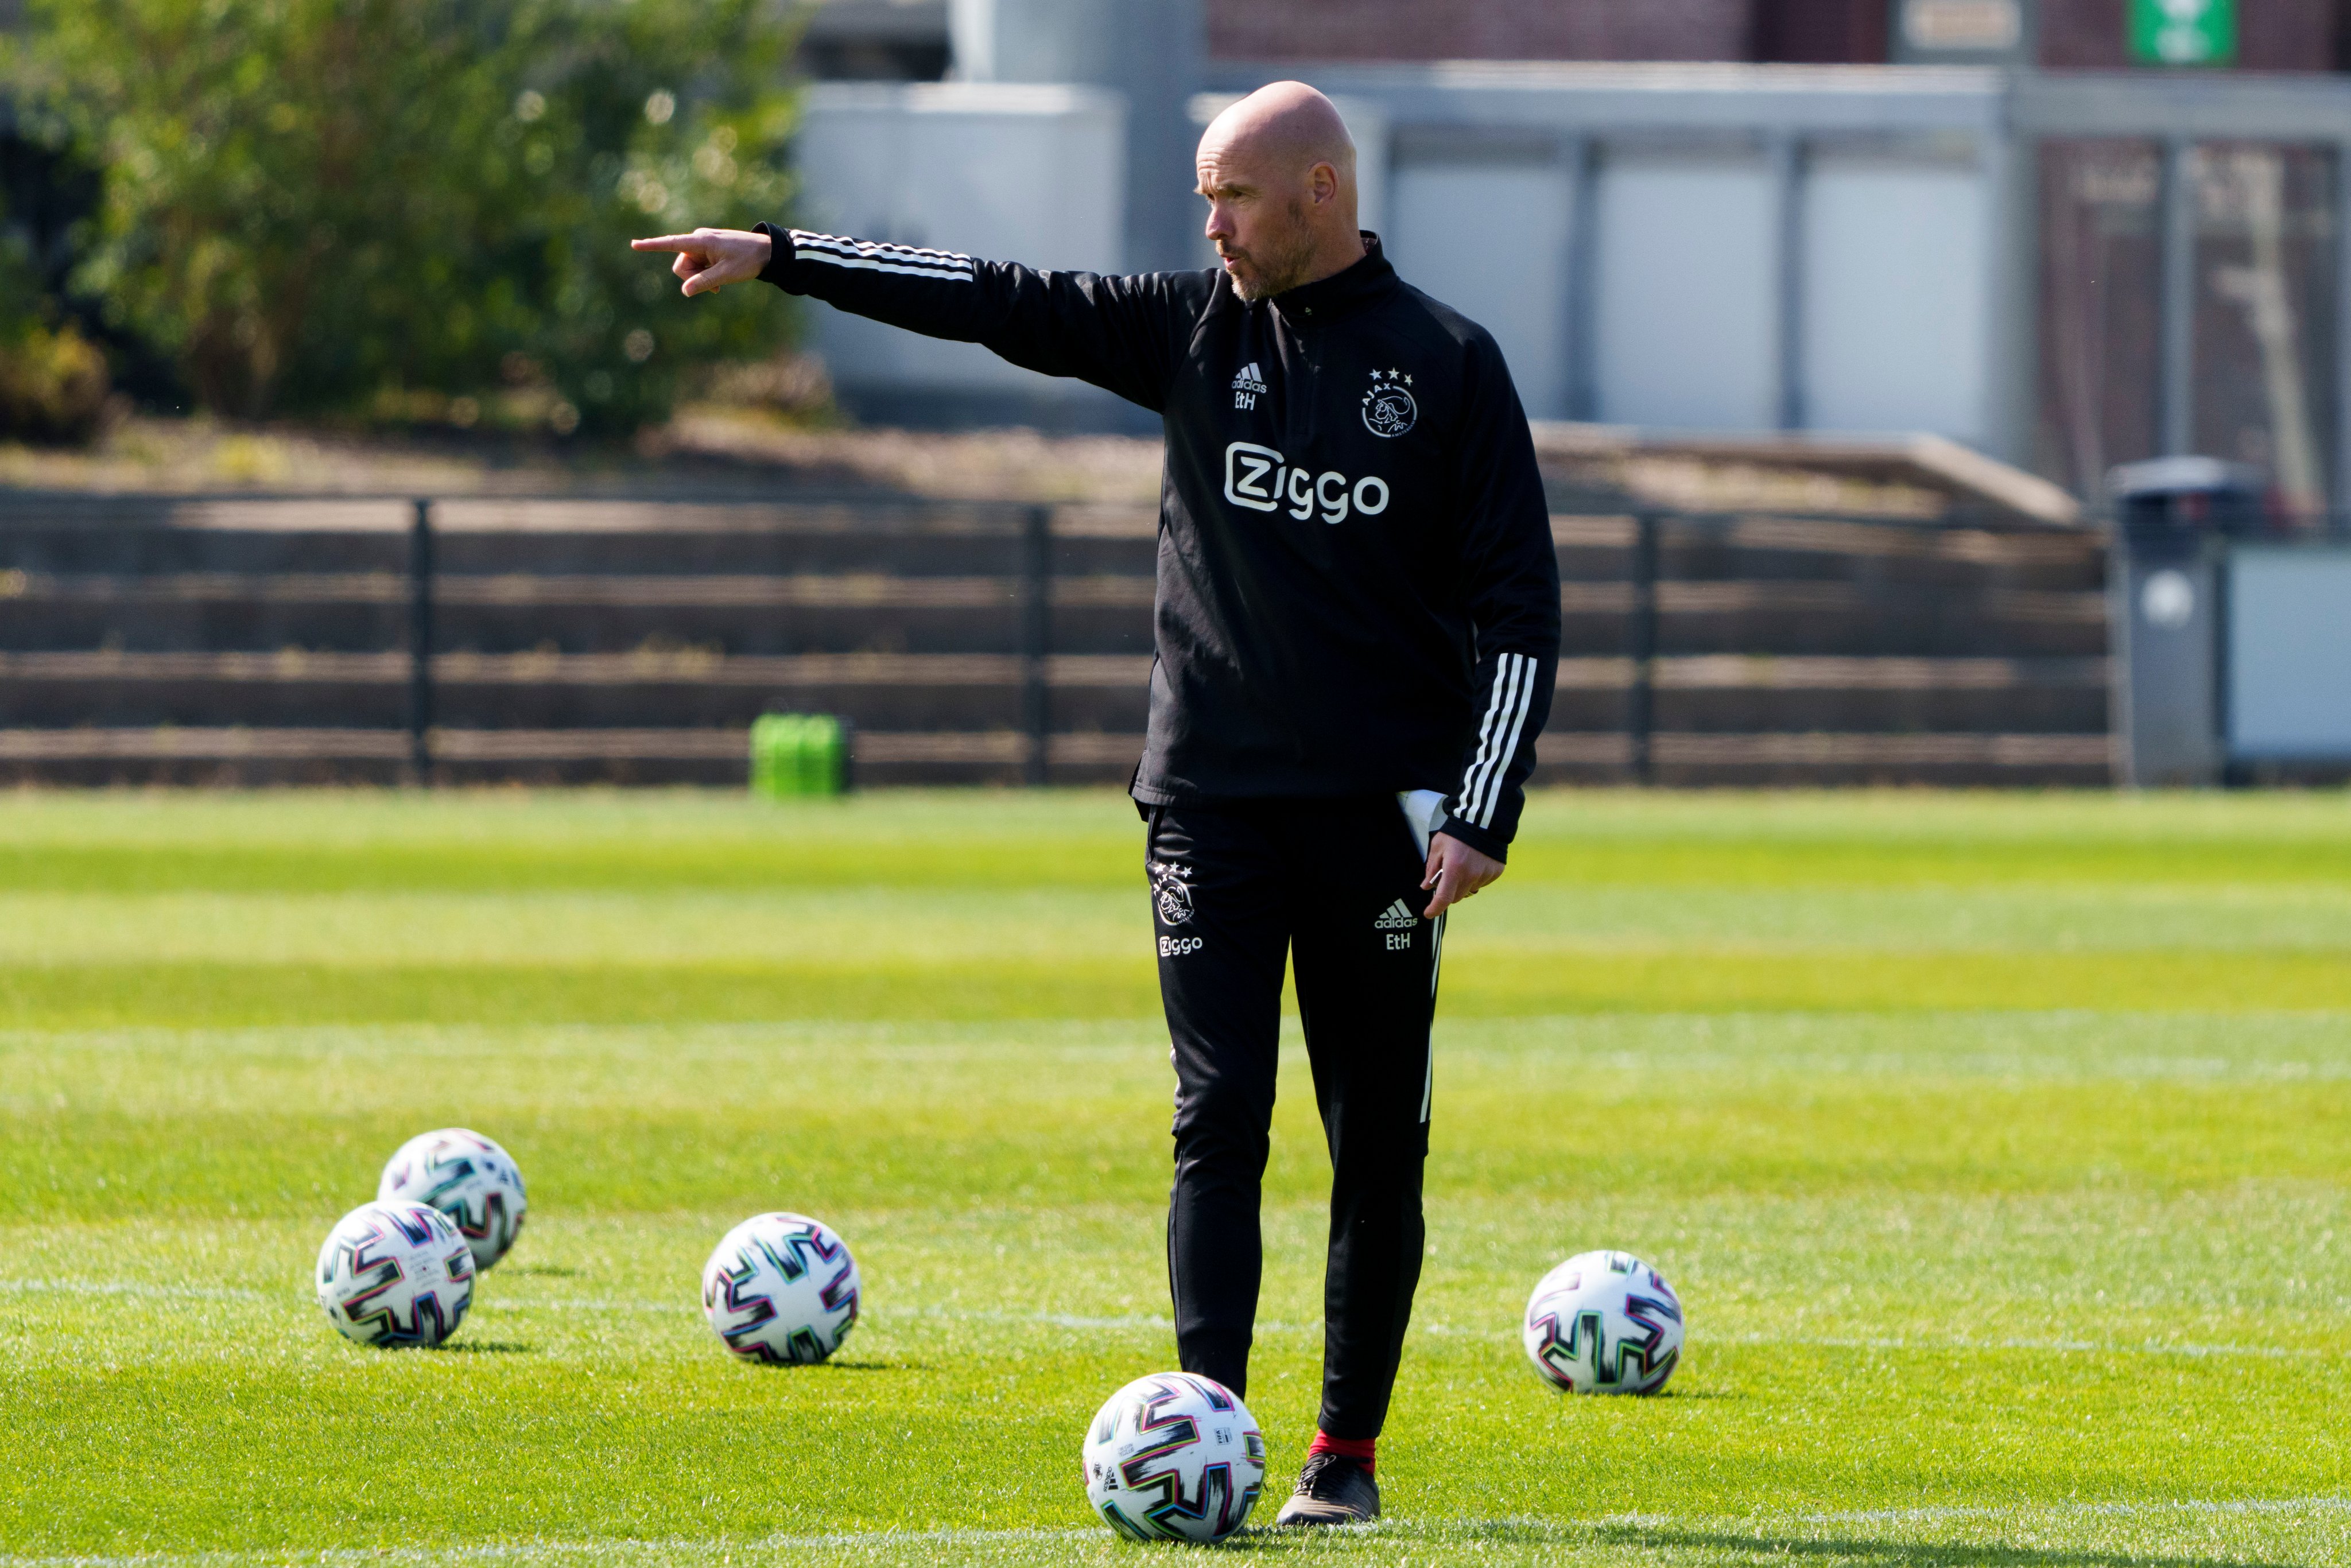 Reports | Manchester United interview Erik ten Hag to become their next permanent manager